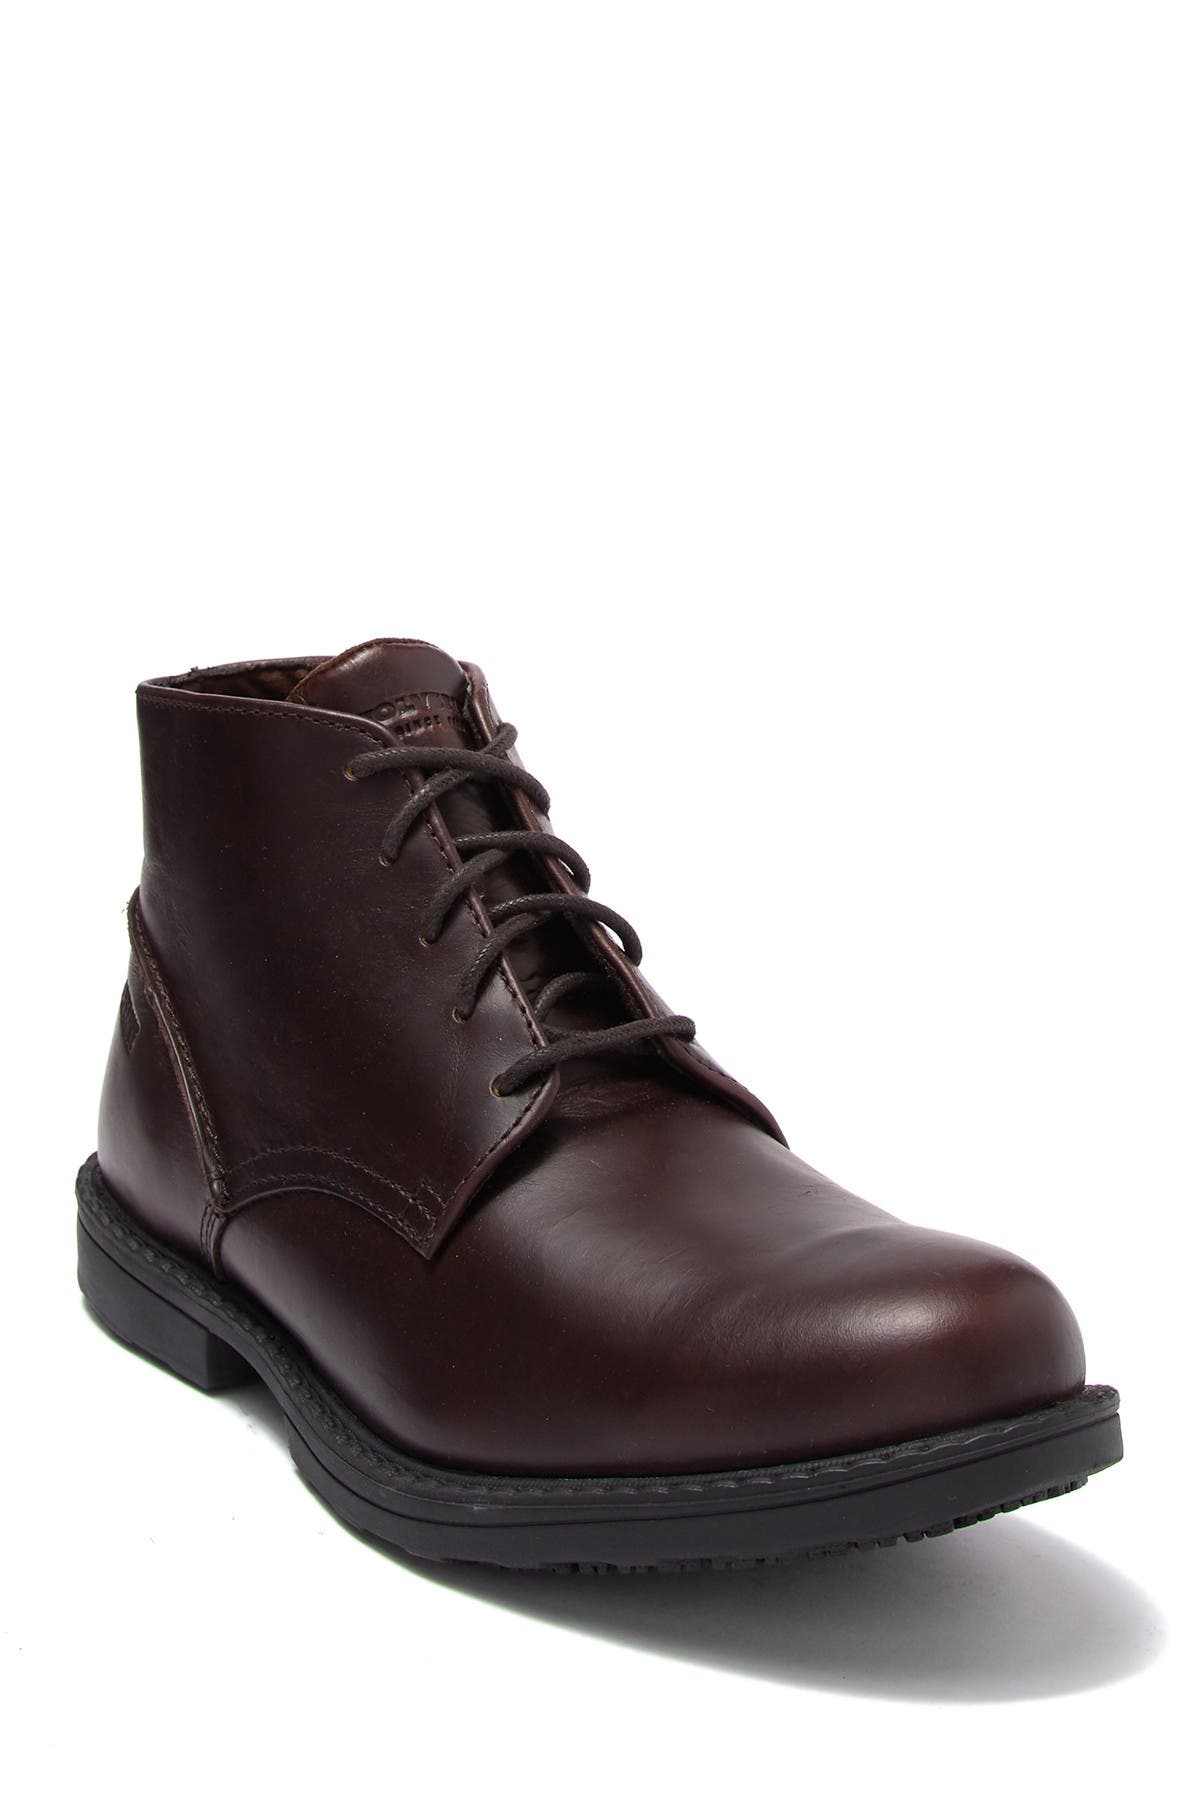 Wolverine | Bedford Leather Chukka Boot 